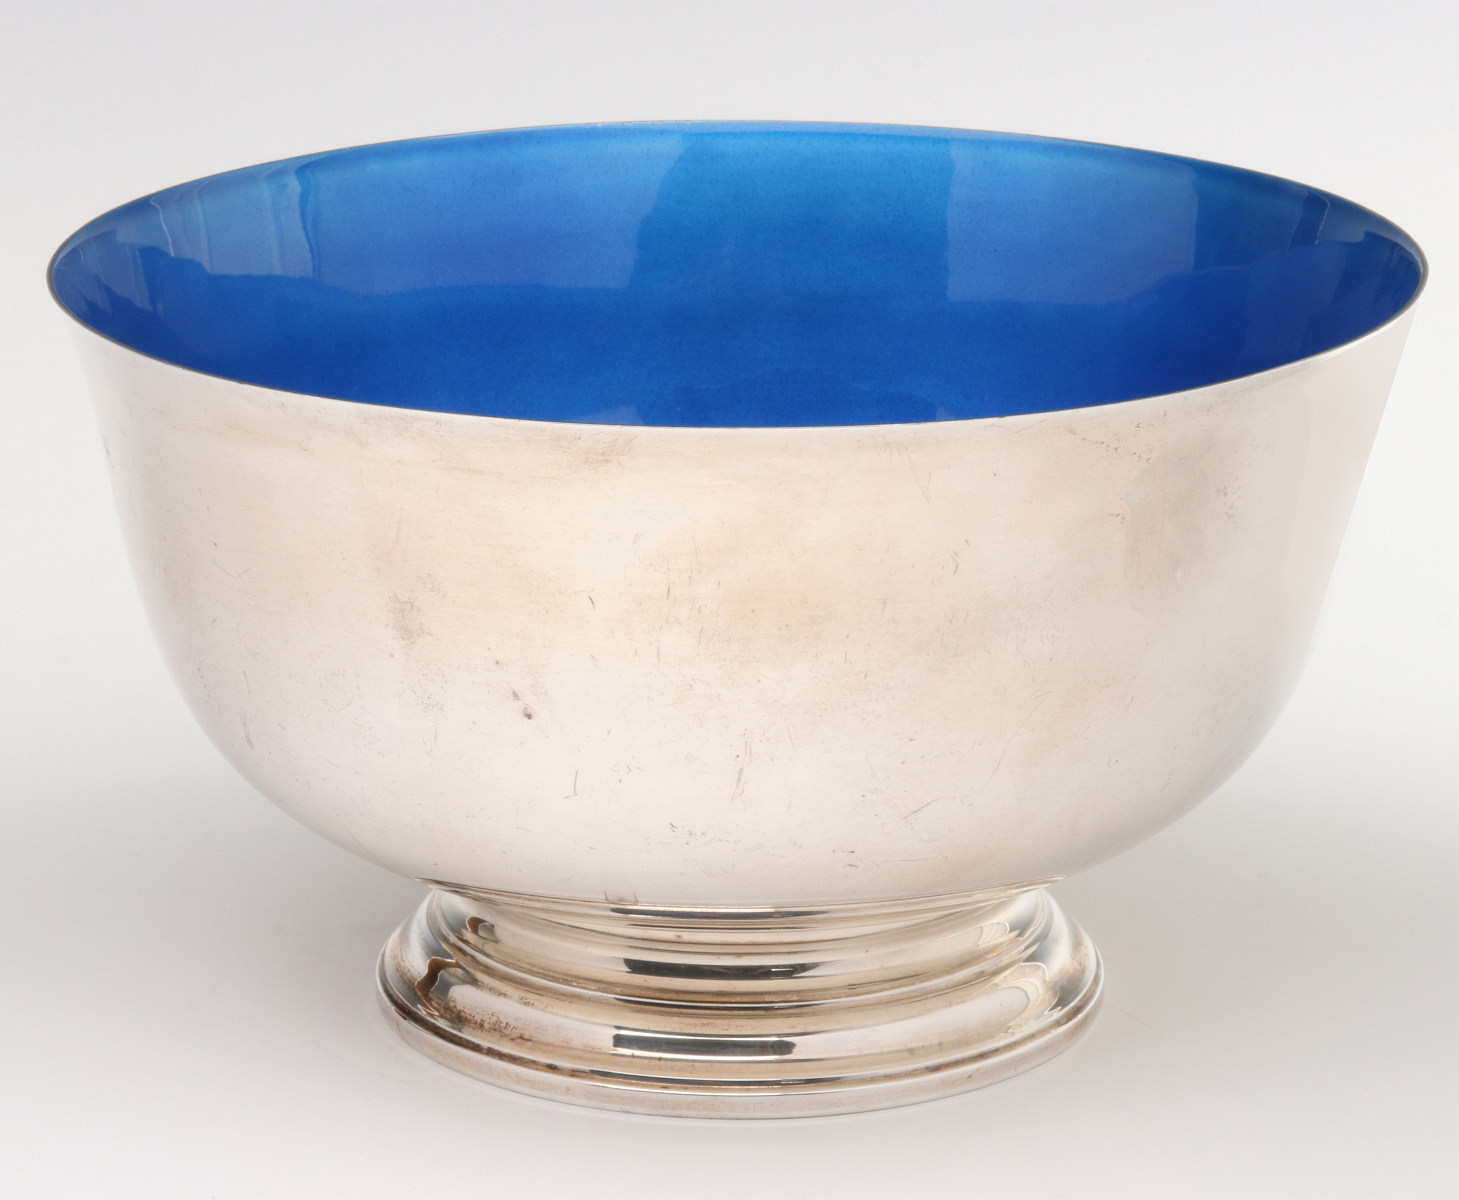 A TOWLE STERLING SILVER BOWL WITH BLUE ENAMEL INTERIOR.